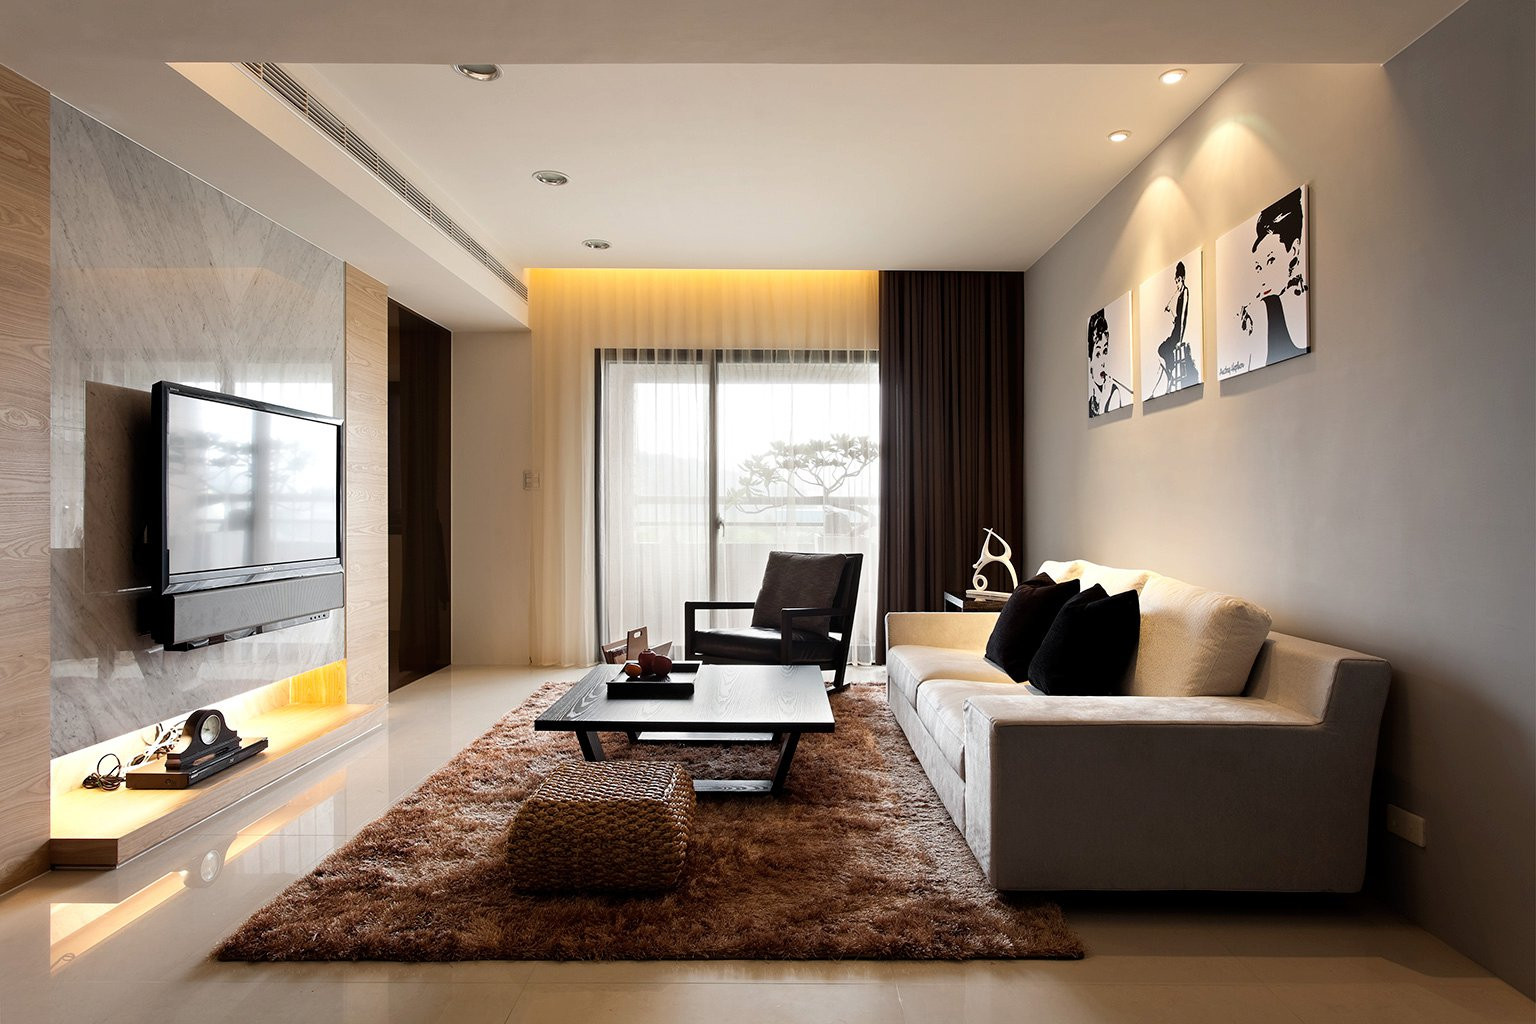 Decorating A Living Room
 Modern Minimalist Decor with a Homey Flow